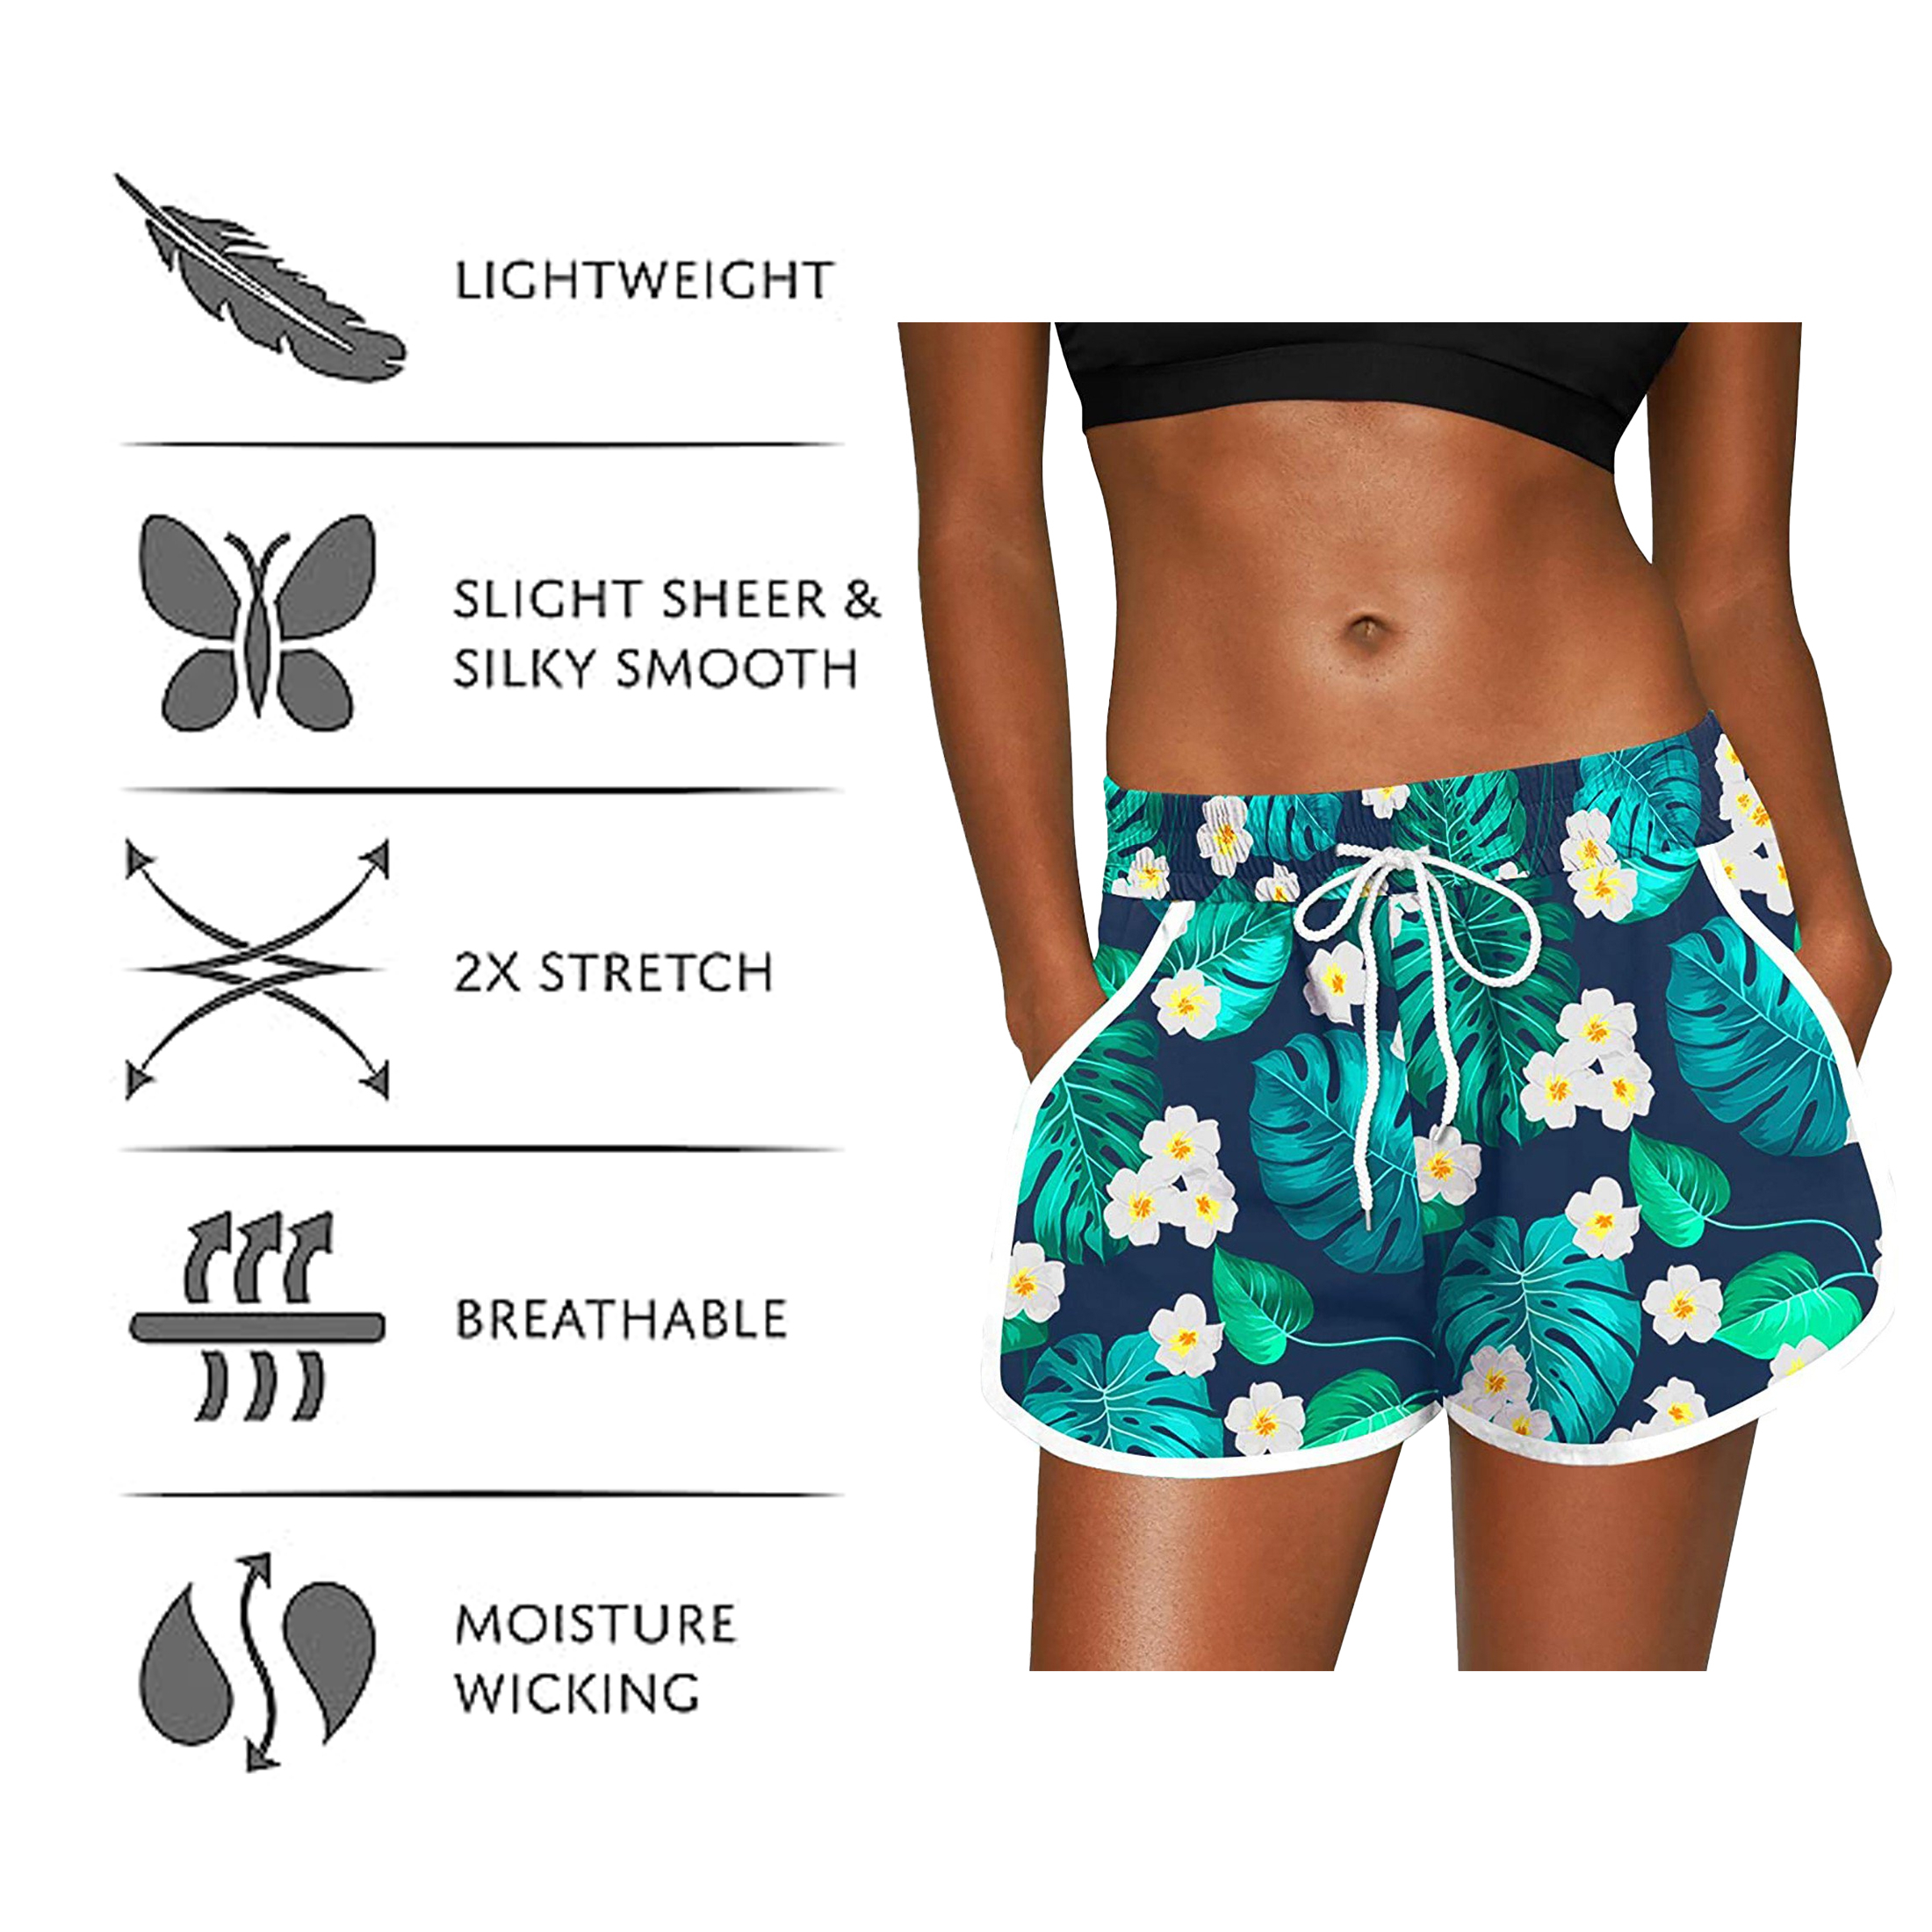 2-Pack Women's Floral Printed Shorts Elastic Waist Drawstring Summer Lounge Wear Pants Casual Dolphin Shorts With Pockets Quick Dry - M